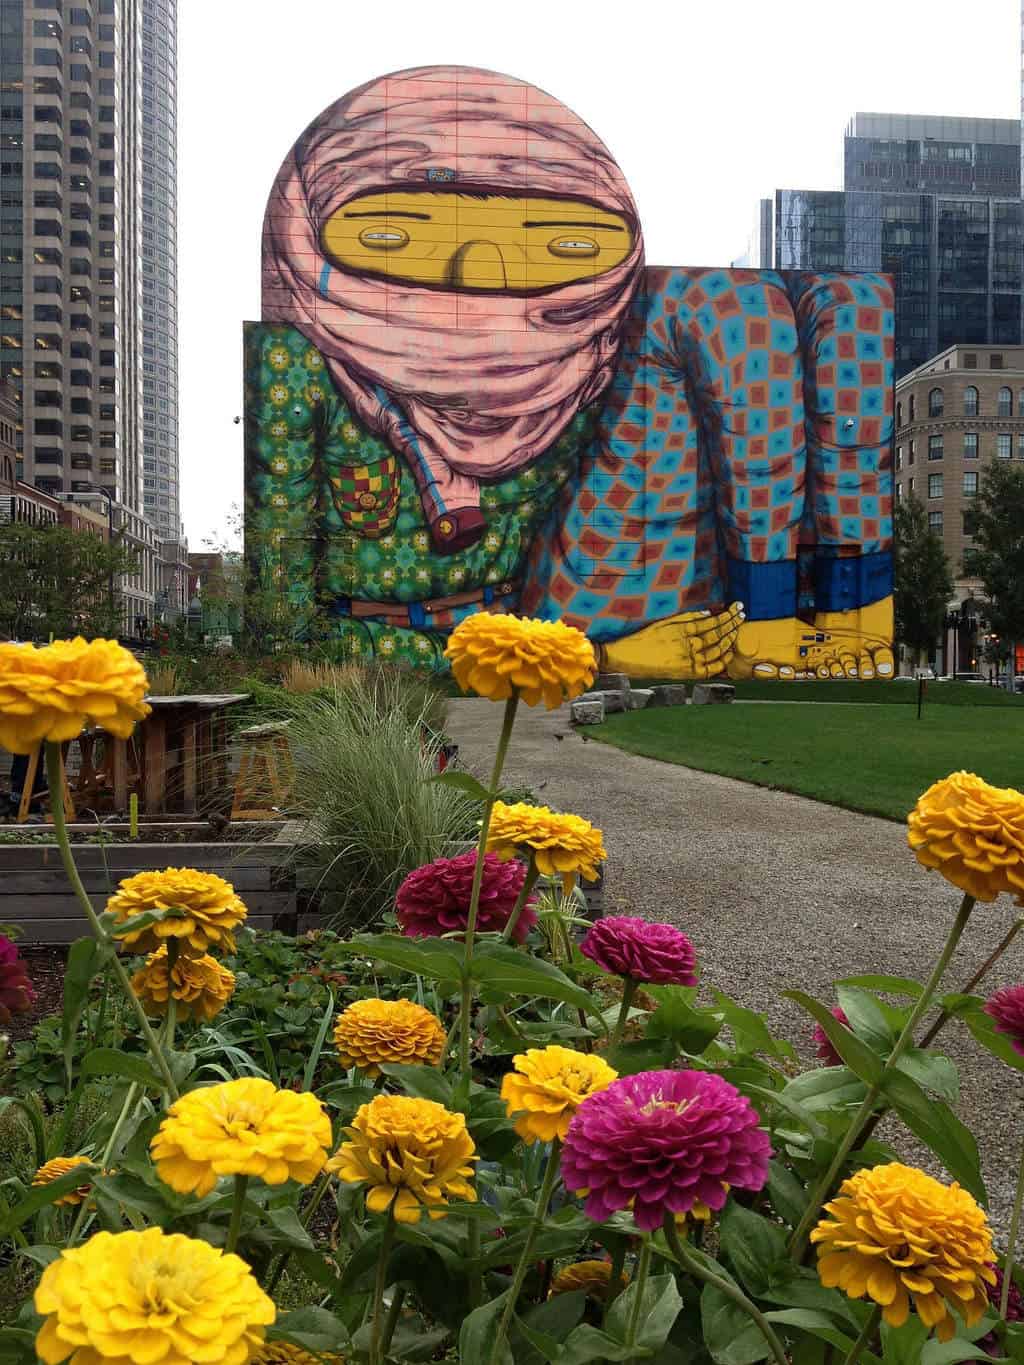 Funky mural and flowers in Dewey Square, Boston